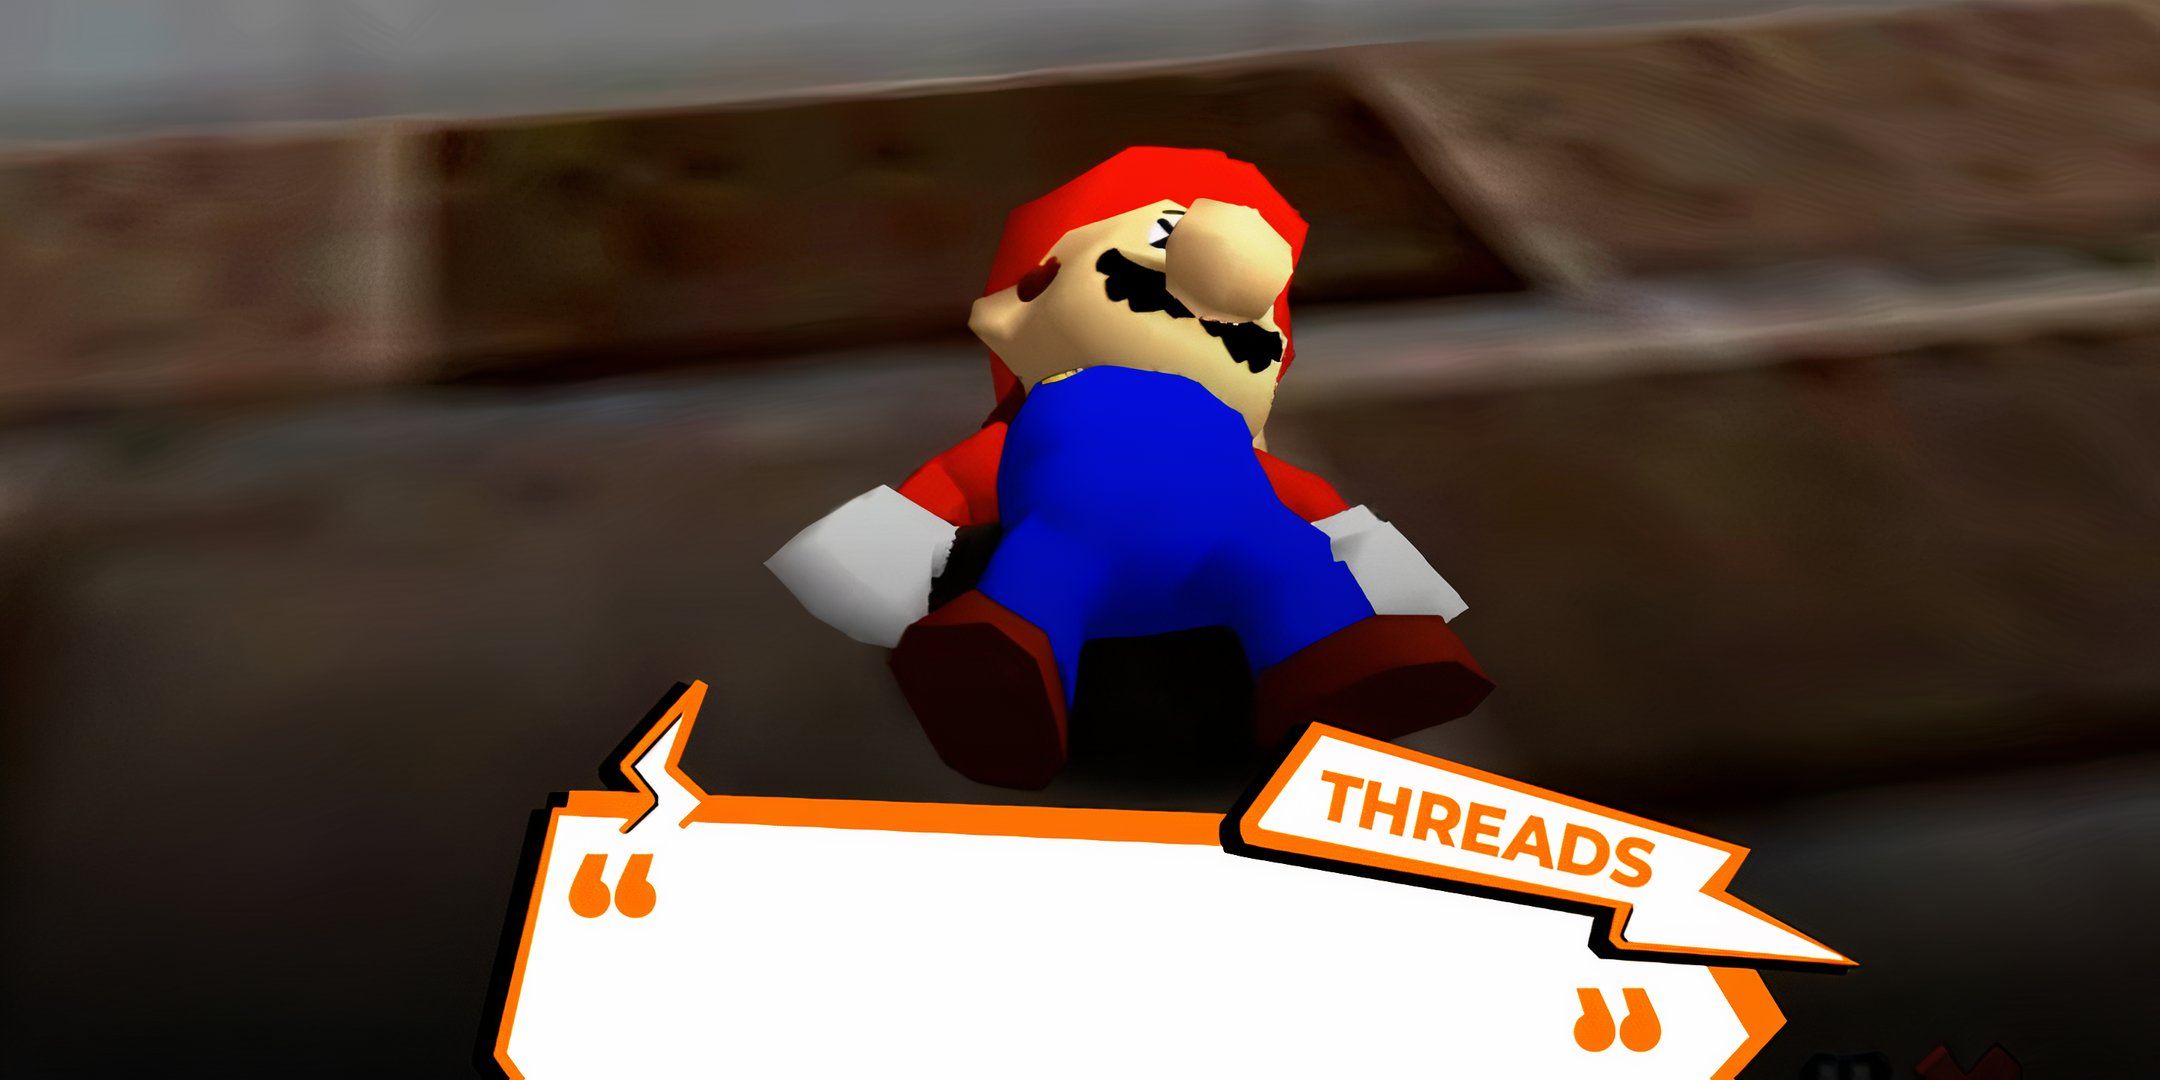 Was the N64 a disappointment Thread (featuring Mario from Mario 64)